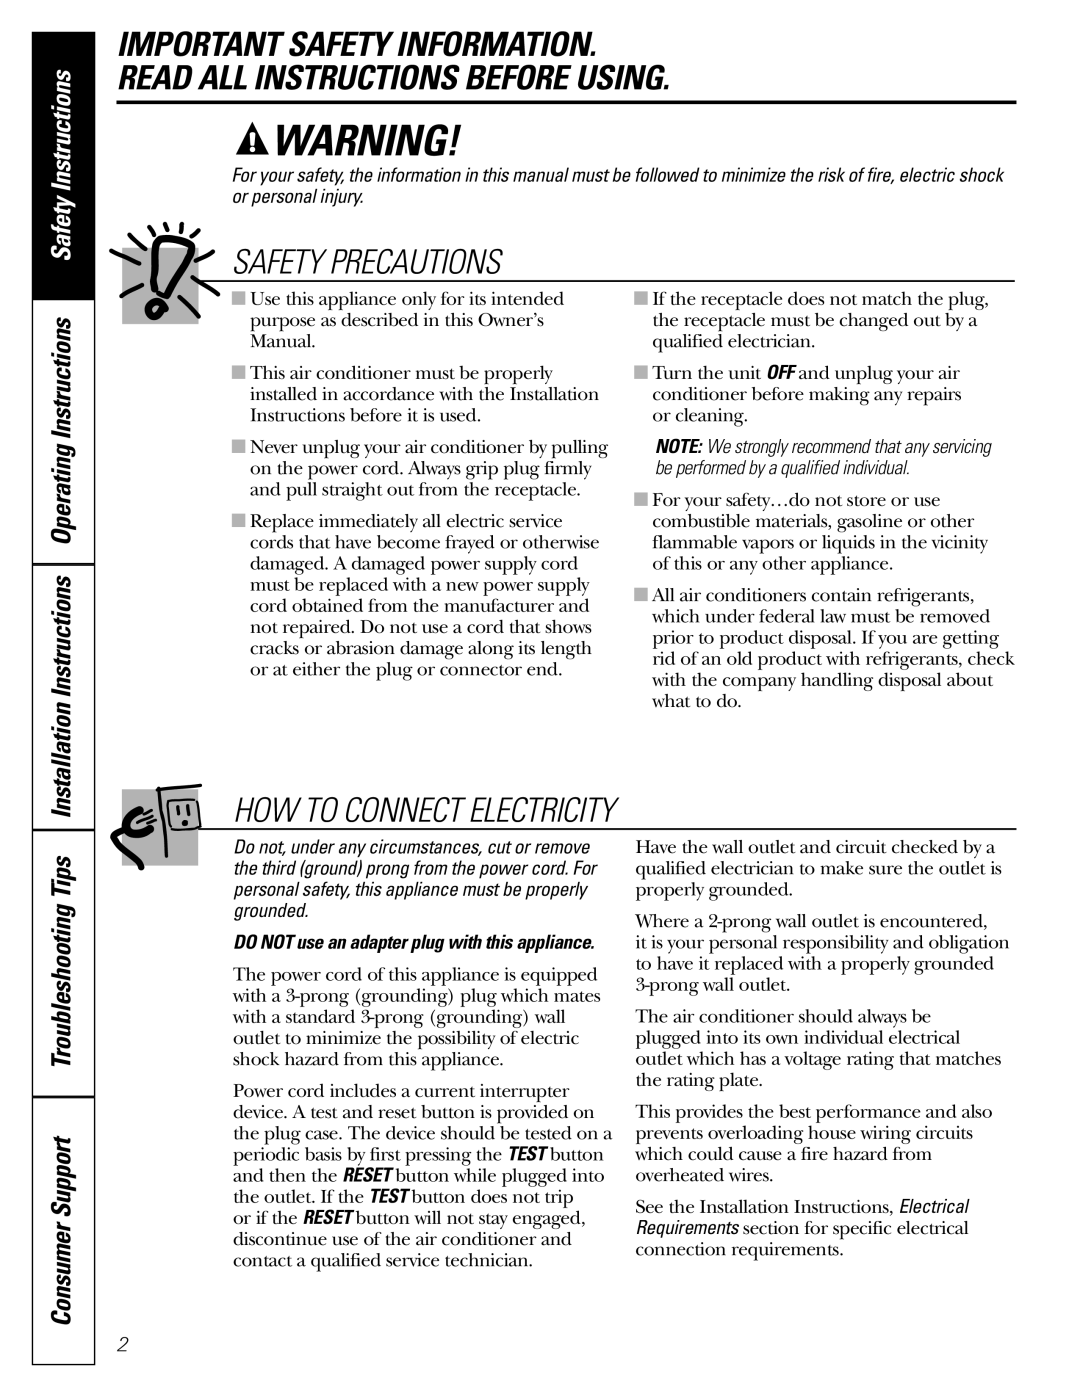 GE ASM08* Important Safety Information, Read All Instructions Before Using, Safety Precautions, How To Connect Electricity 